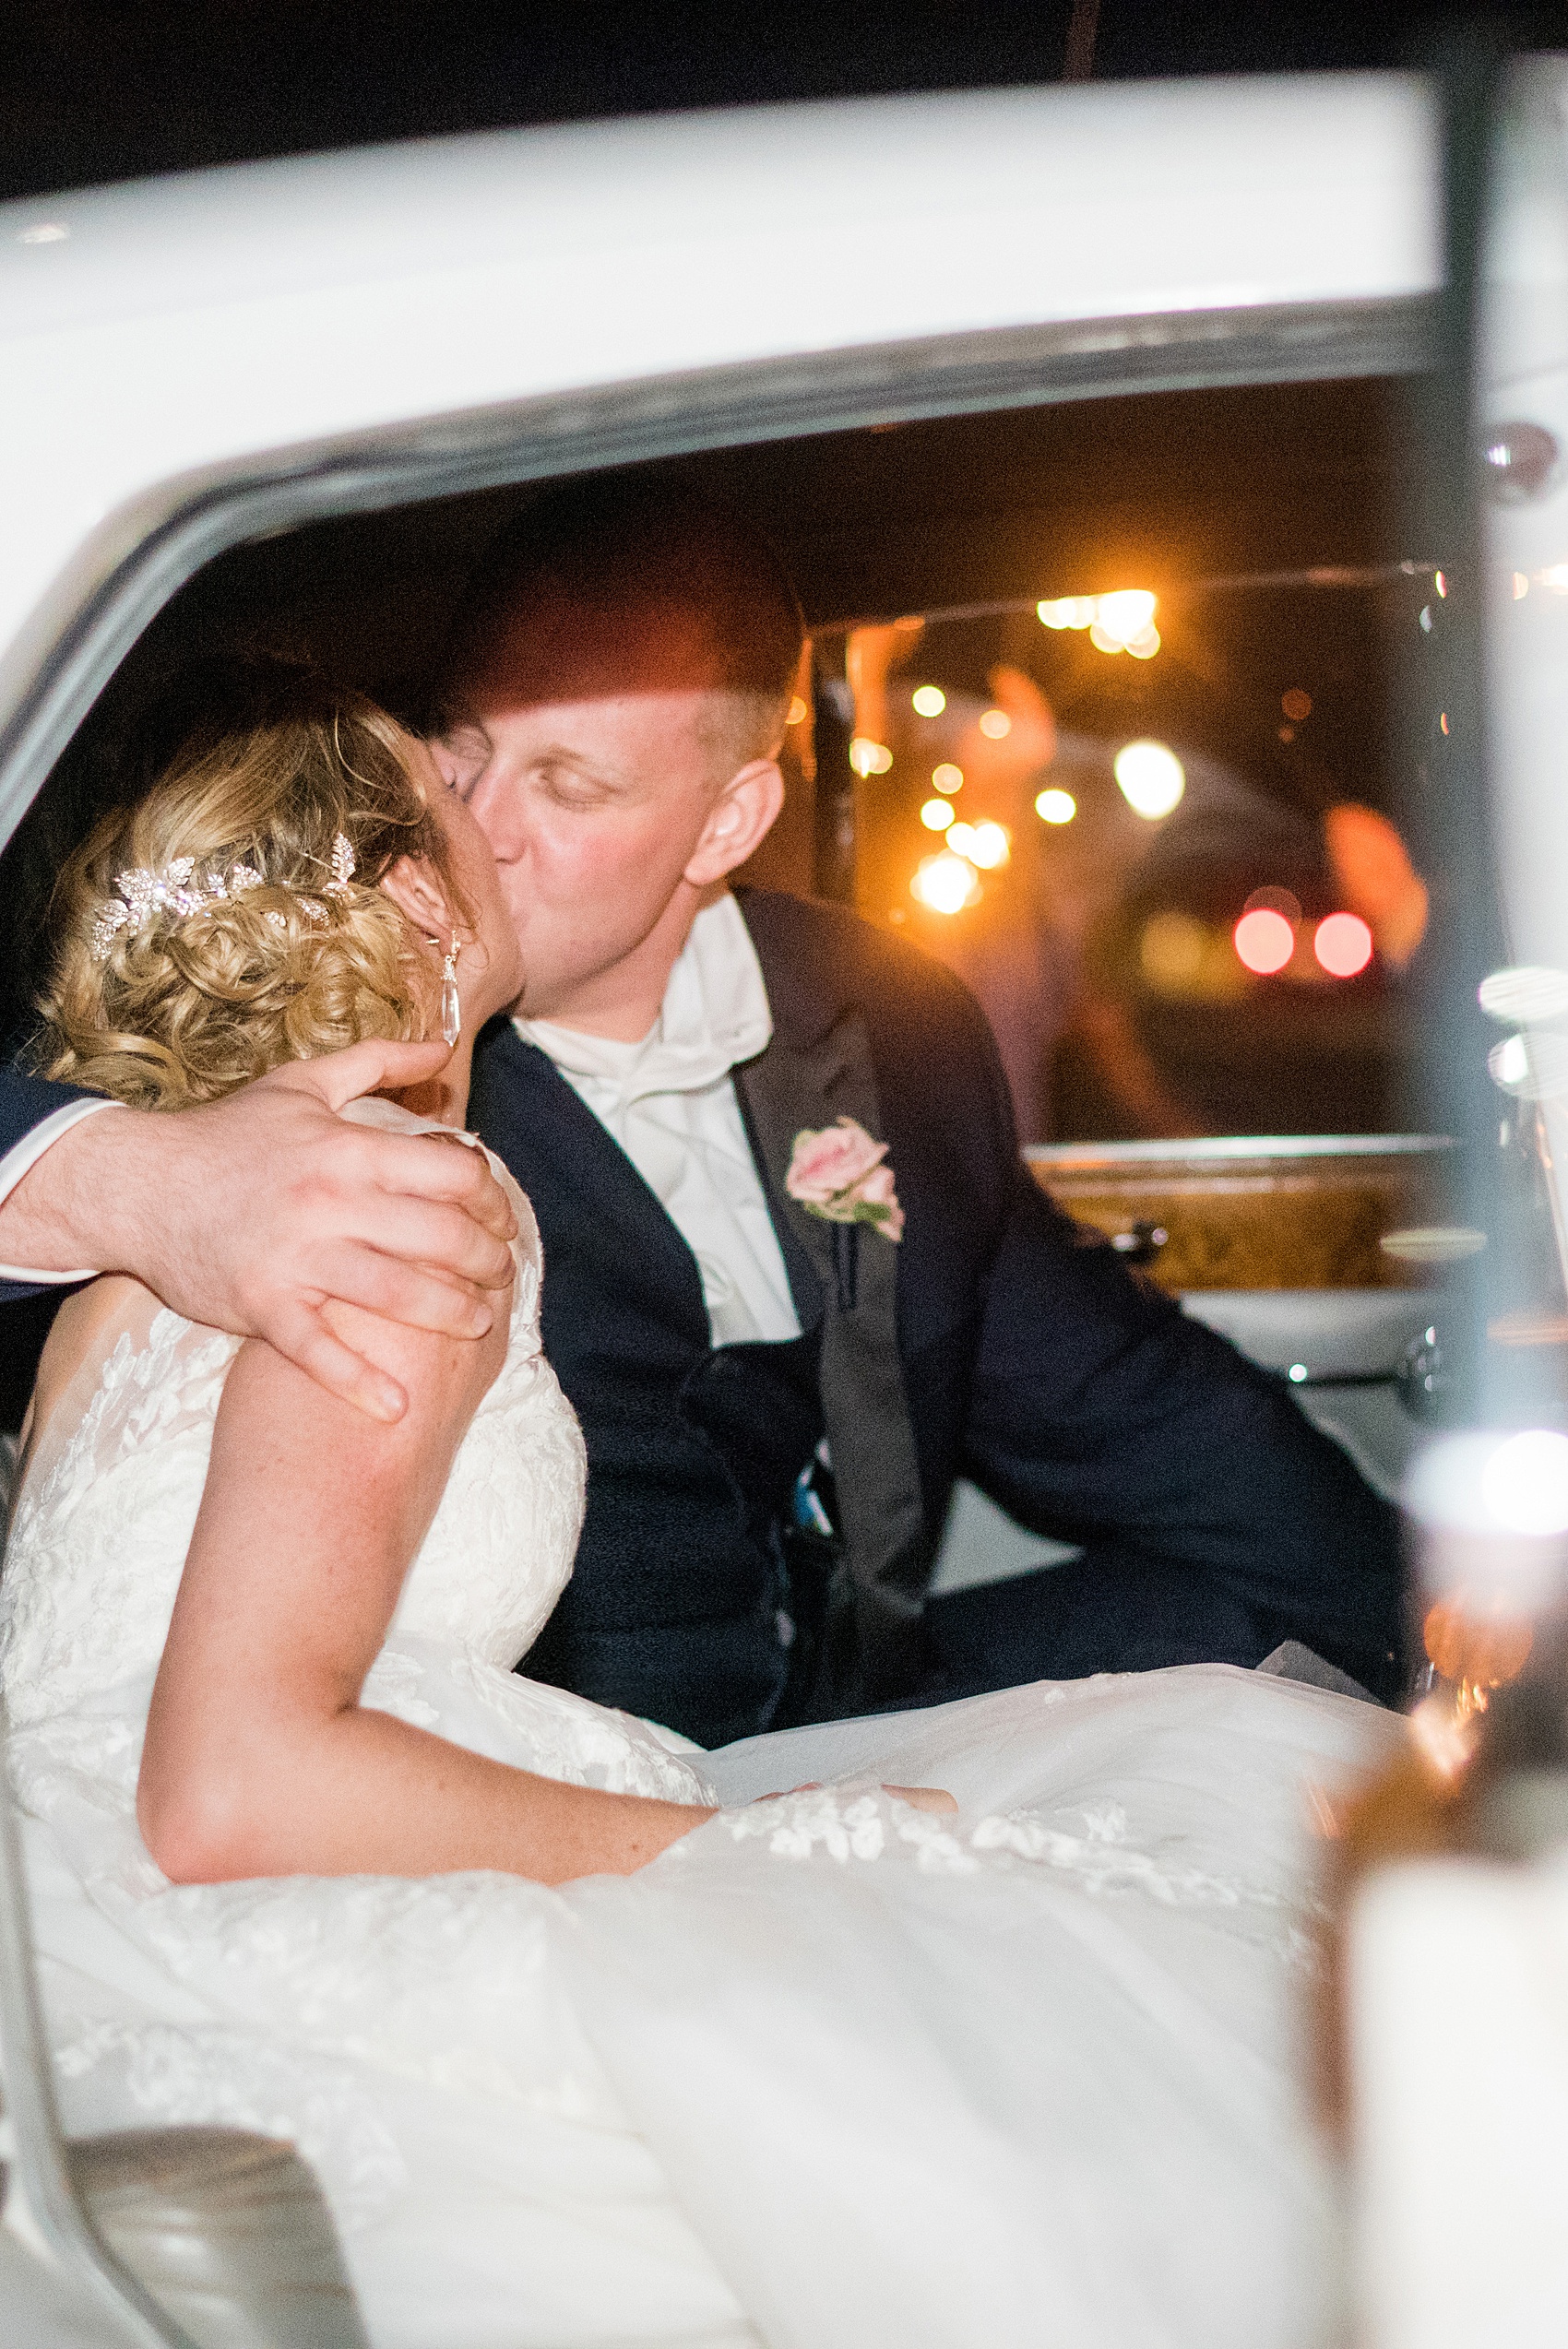 Saratoga Springs destination wedding photos by Mikkel Paige Photography. The party was held at Saratoga National Golf Club venue. The bride and groom did a sparkler exit from their spring reception and left in a vintage Rolls Royce car. #SaratogaSpringsNY #SaratogaSprings #mikkelpaige #NYwedding #destinationwedding #sparklerexit